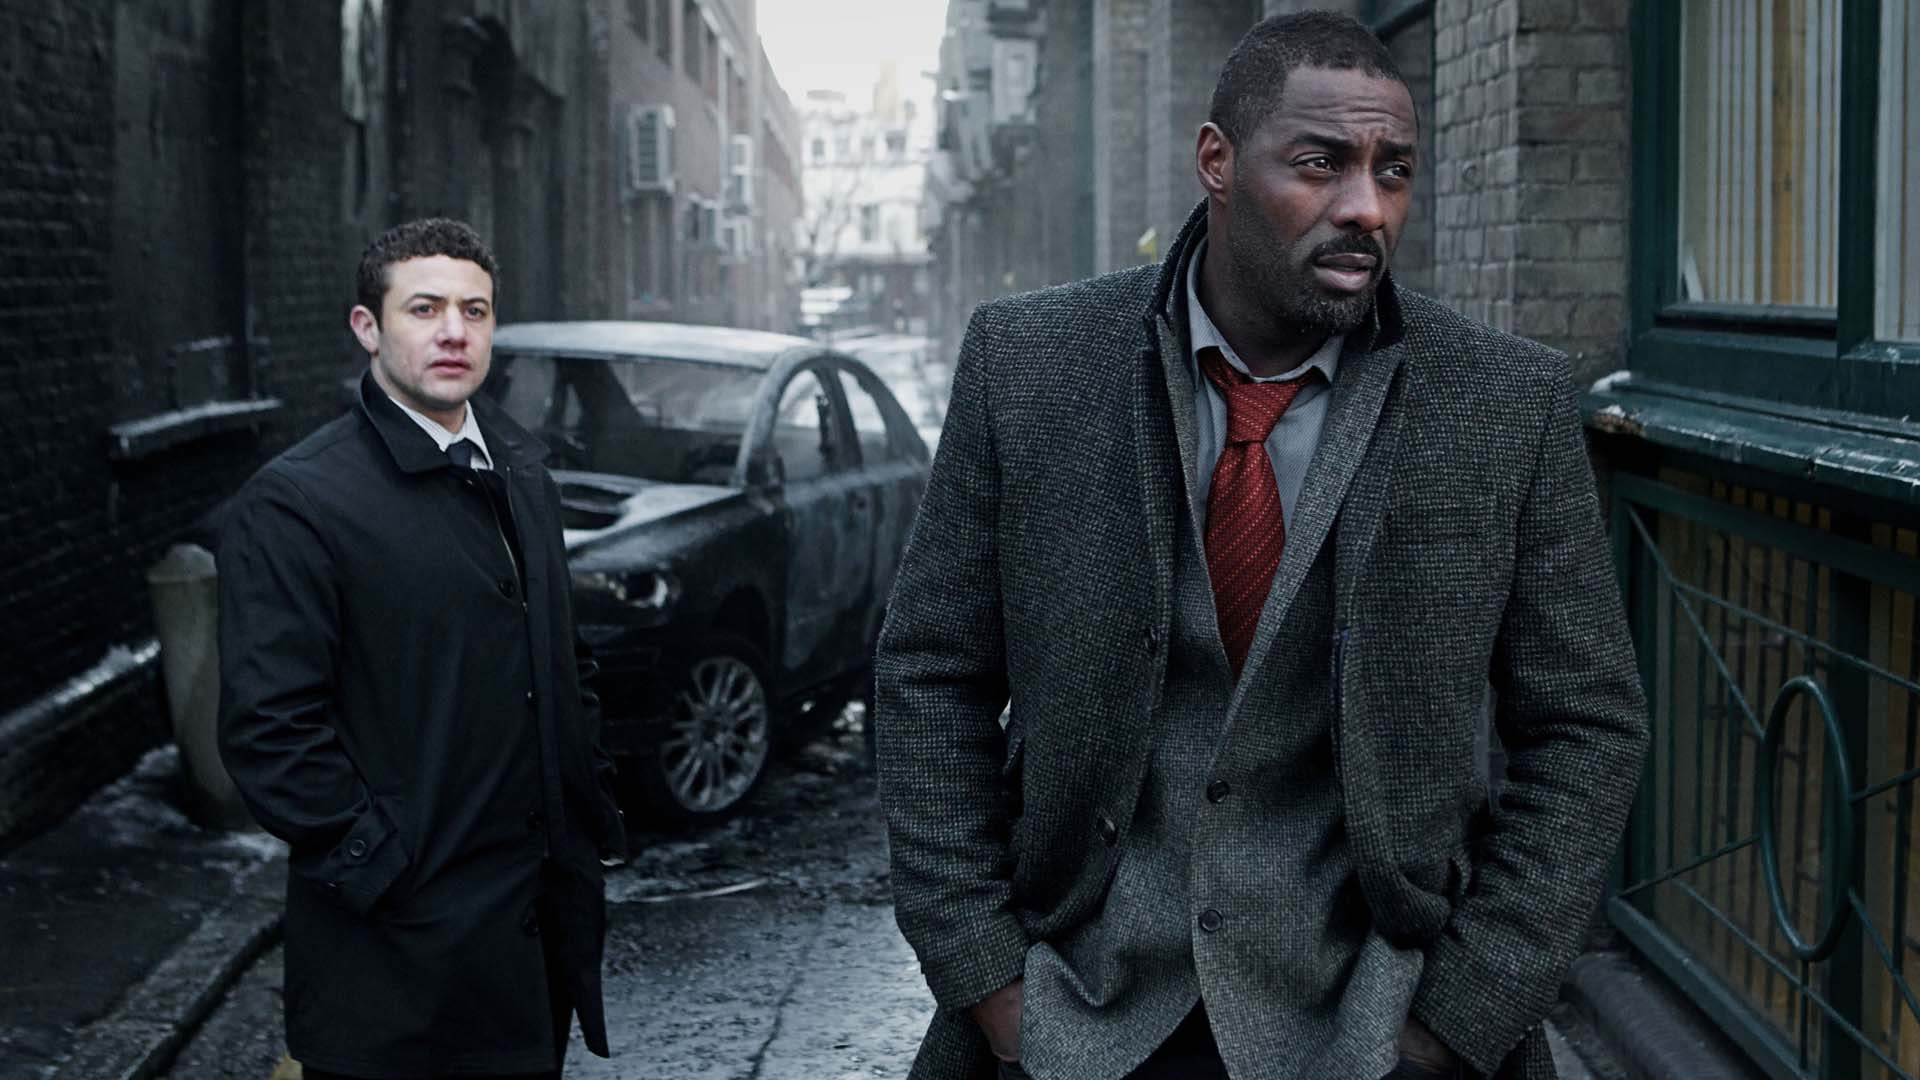 TV Show Luther HD Wallpaper | Background Image